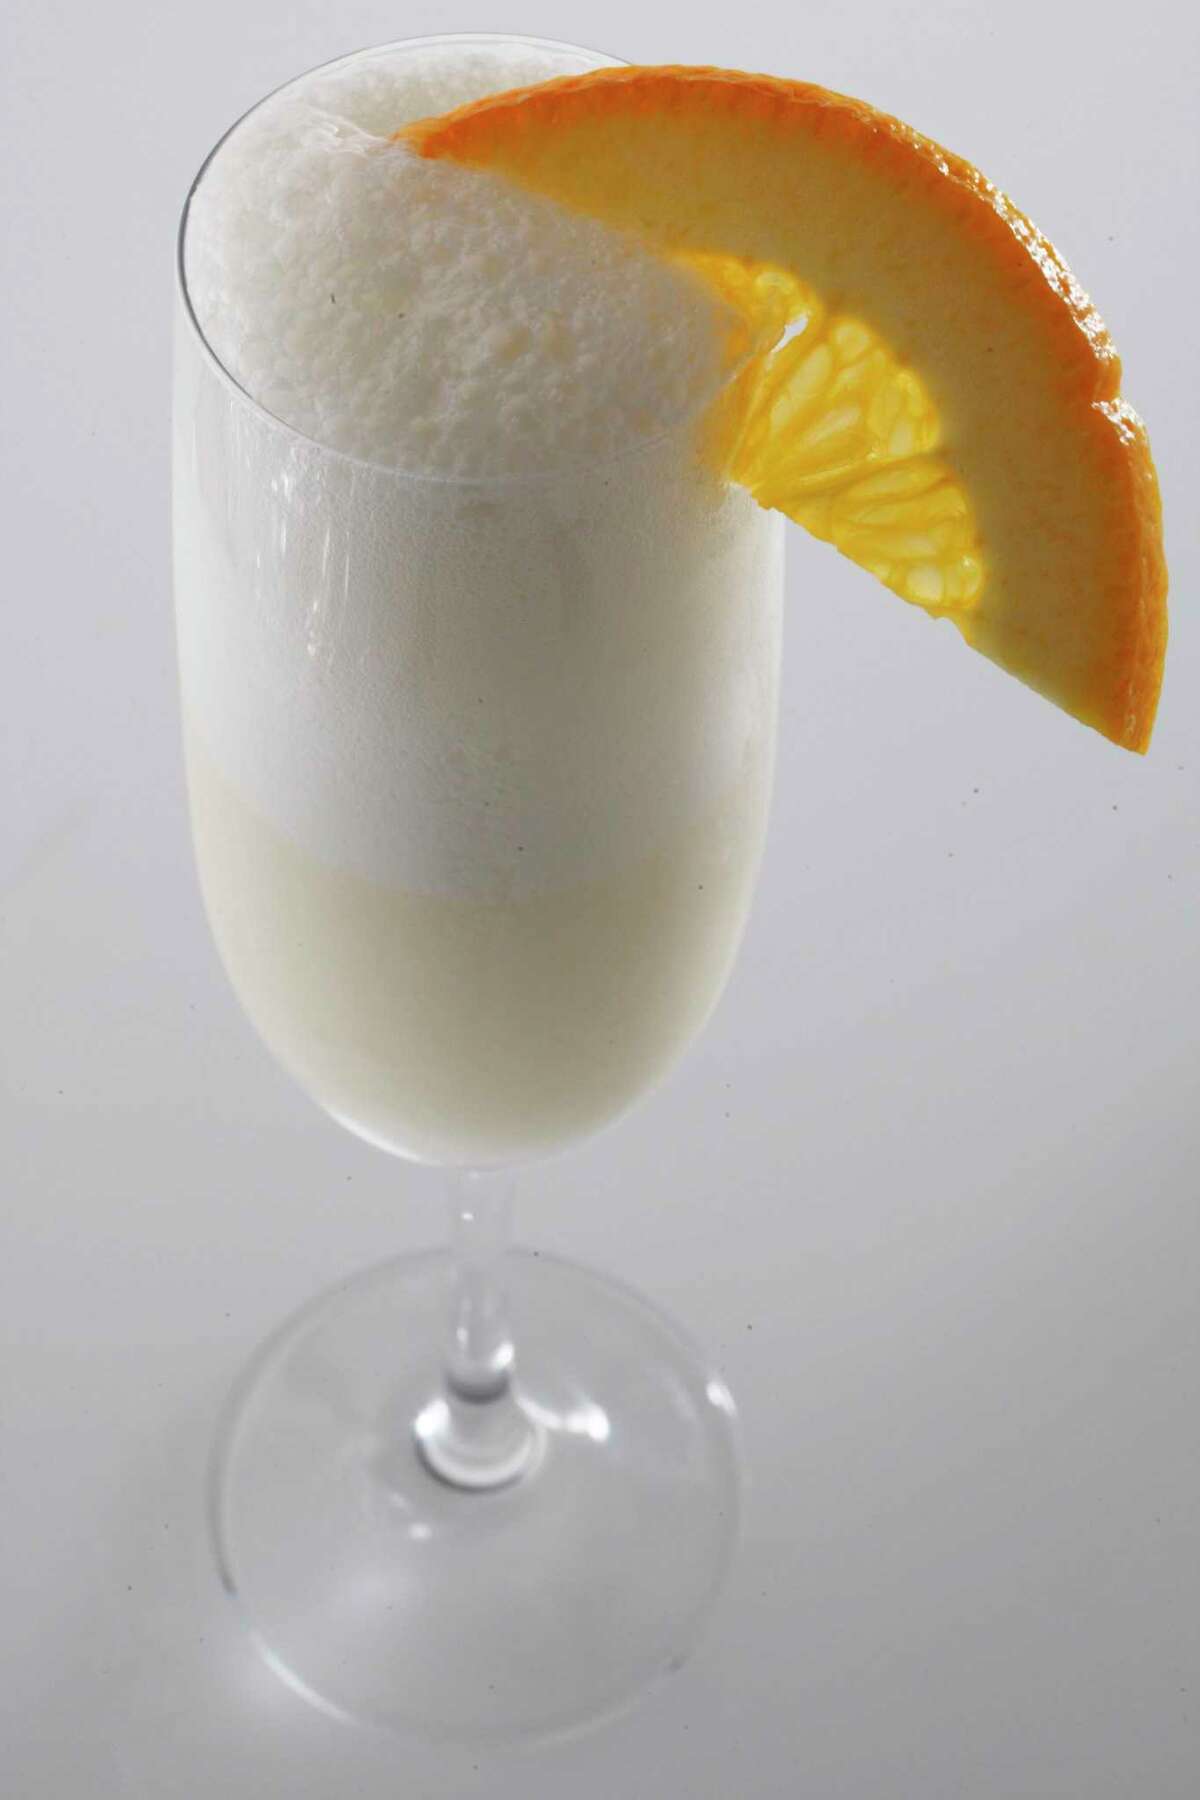 A Ramos Gin Fizz is one of the 10 essential cocktails everyone who entertains should know how to make.